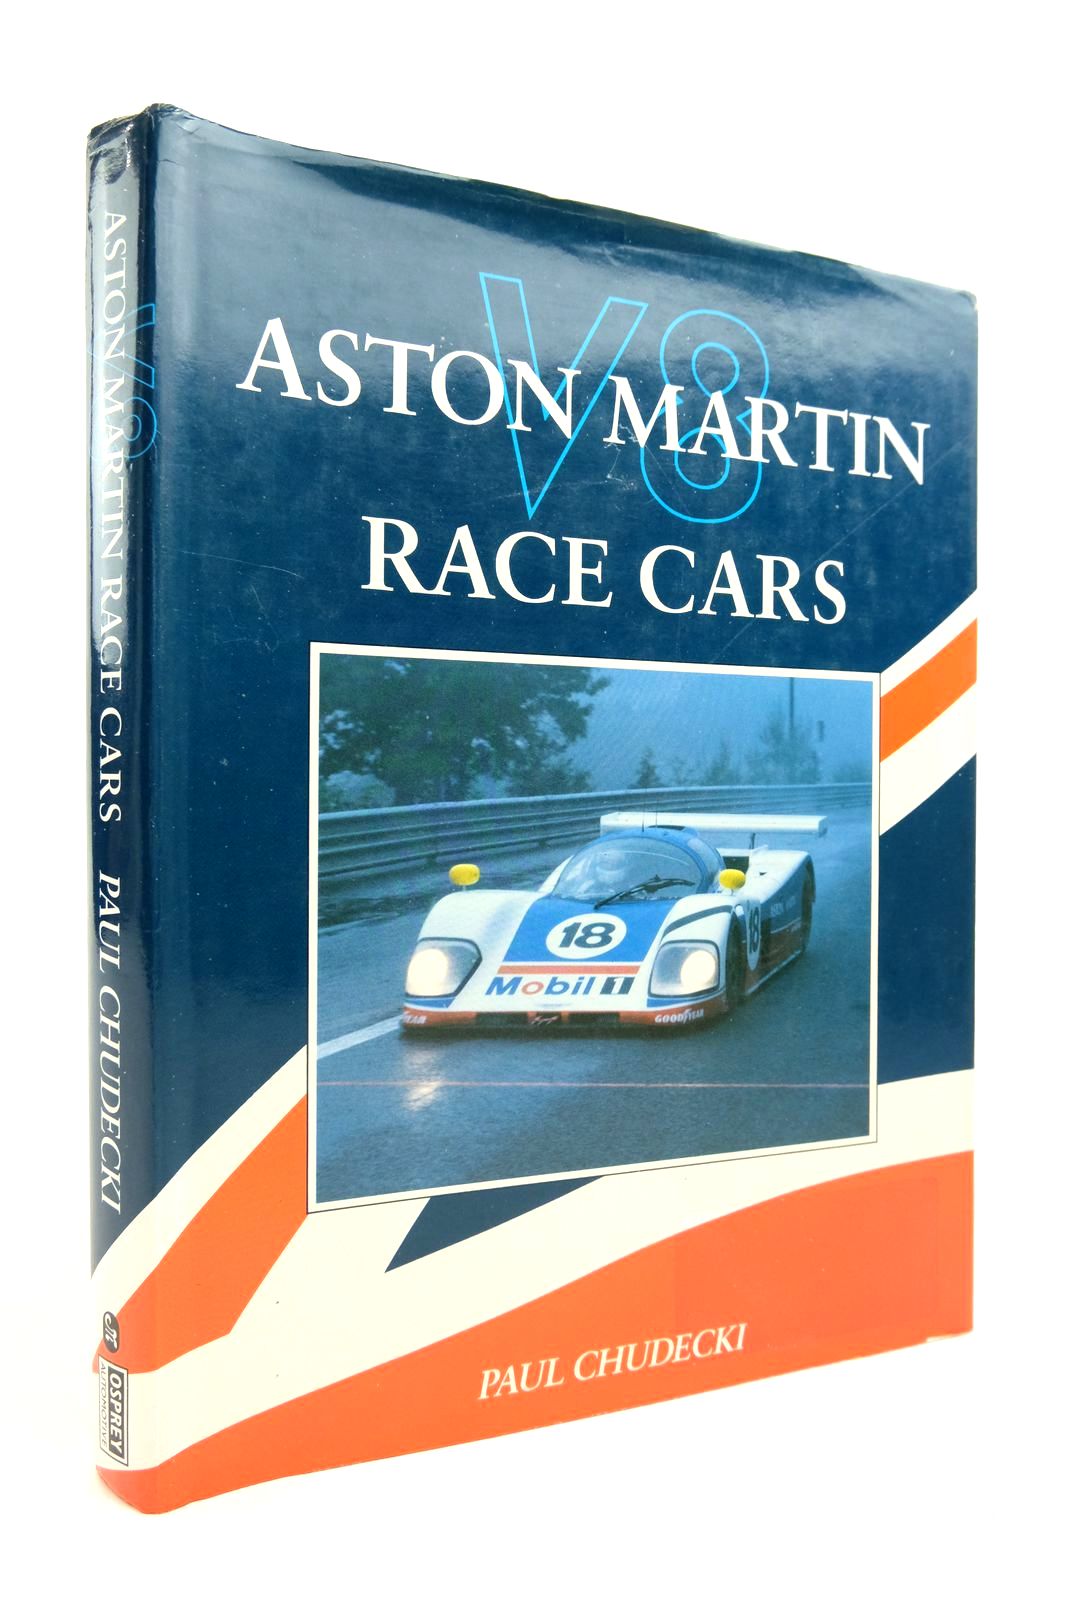 Photo of ASTON MARTIN V8 RACE CARS written by Chudecki, Paul published by Osprey Publishing (STOCK CODE: 2139389)  for sale by Stella & Rose's Books